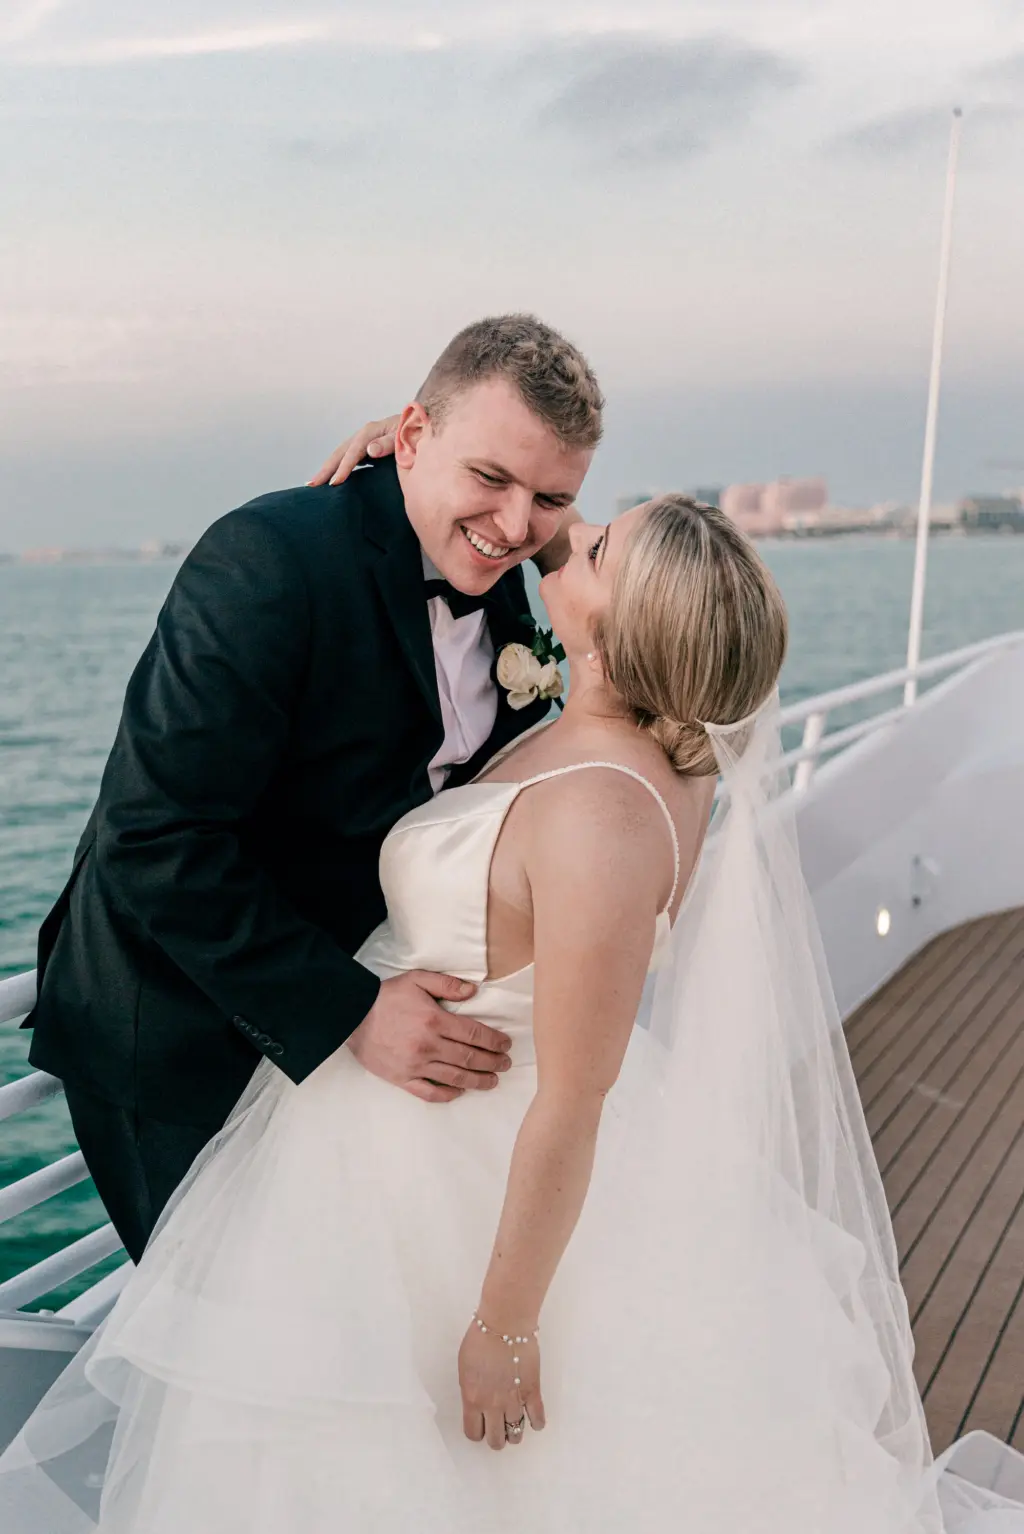 Intimate Bride and Groom Wedding Portrait | Tampa Bay Event Venue Yacht StarShip